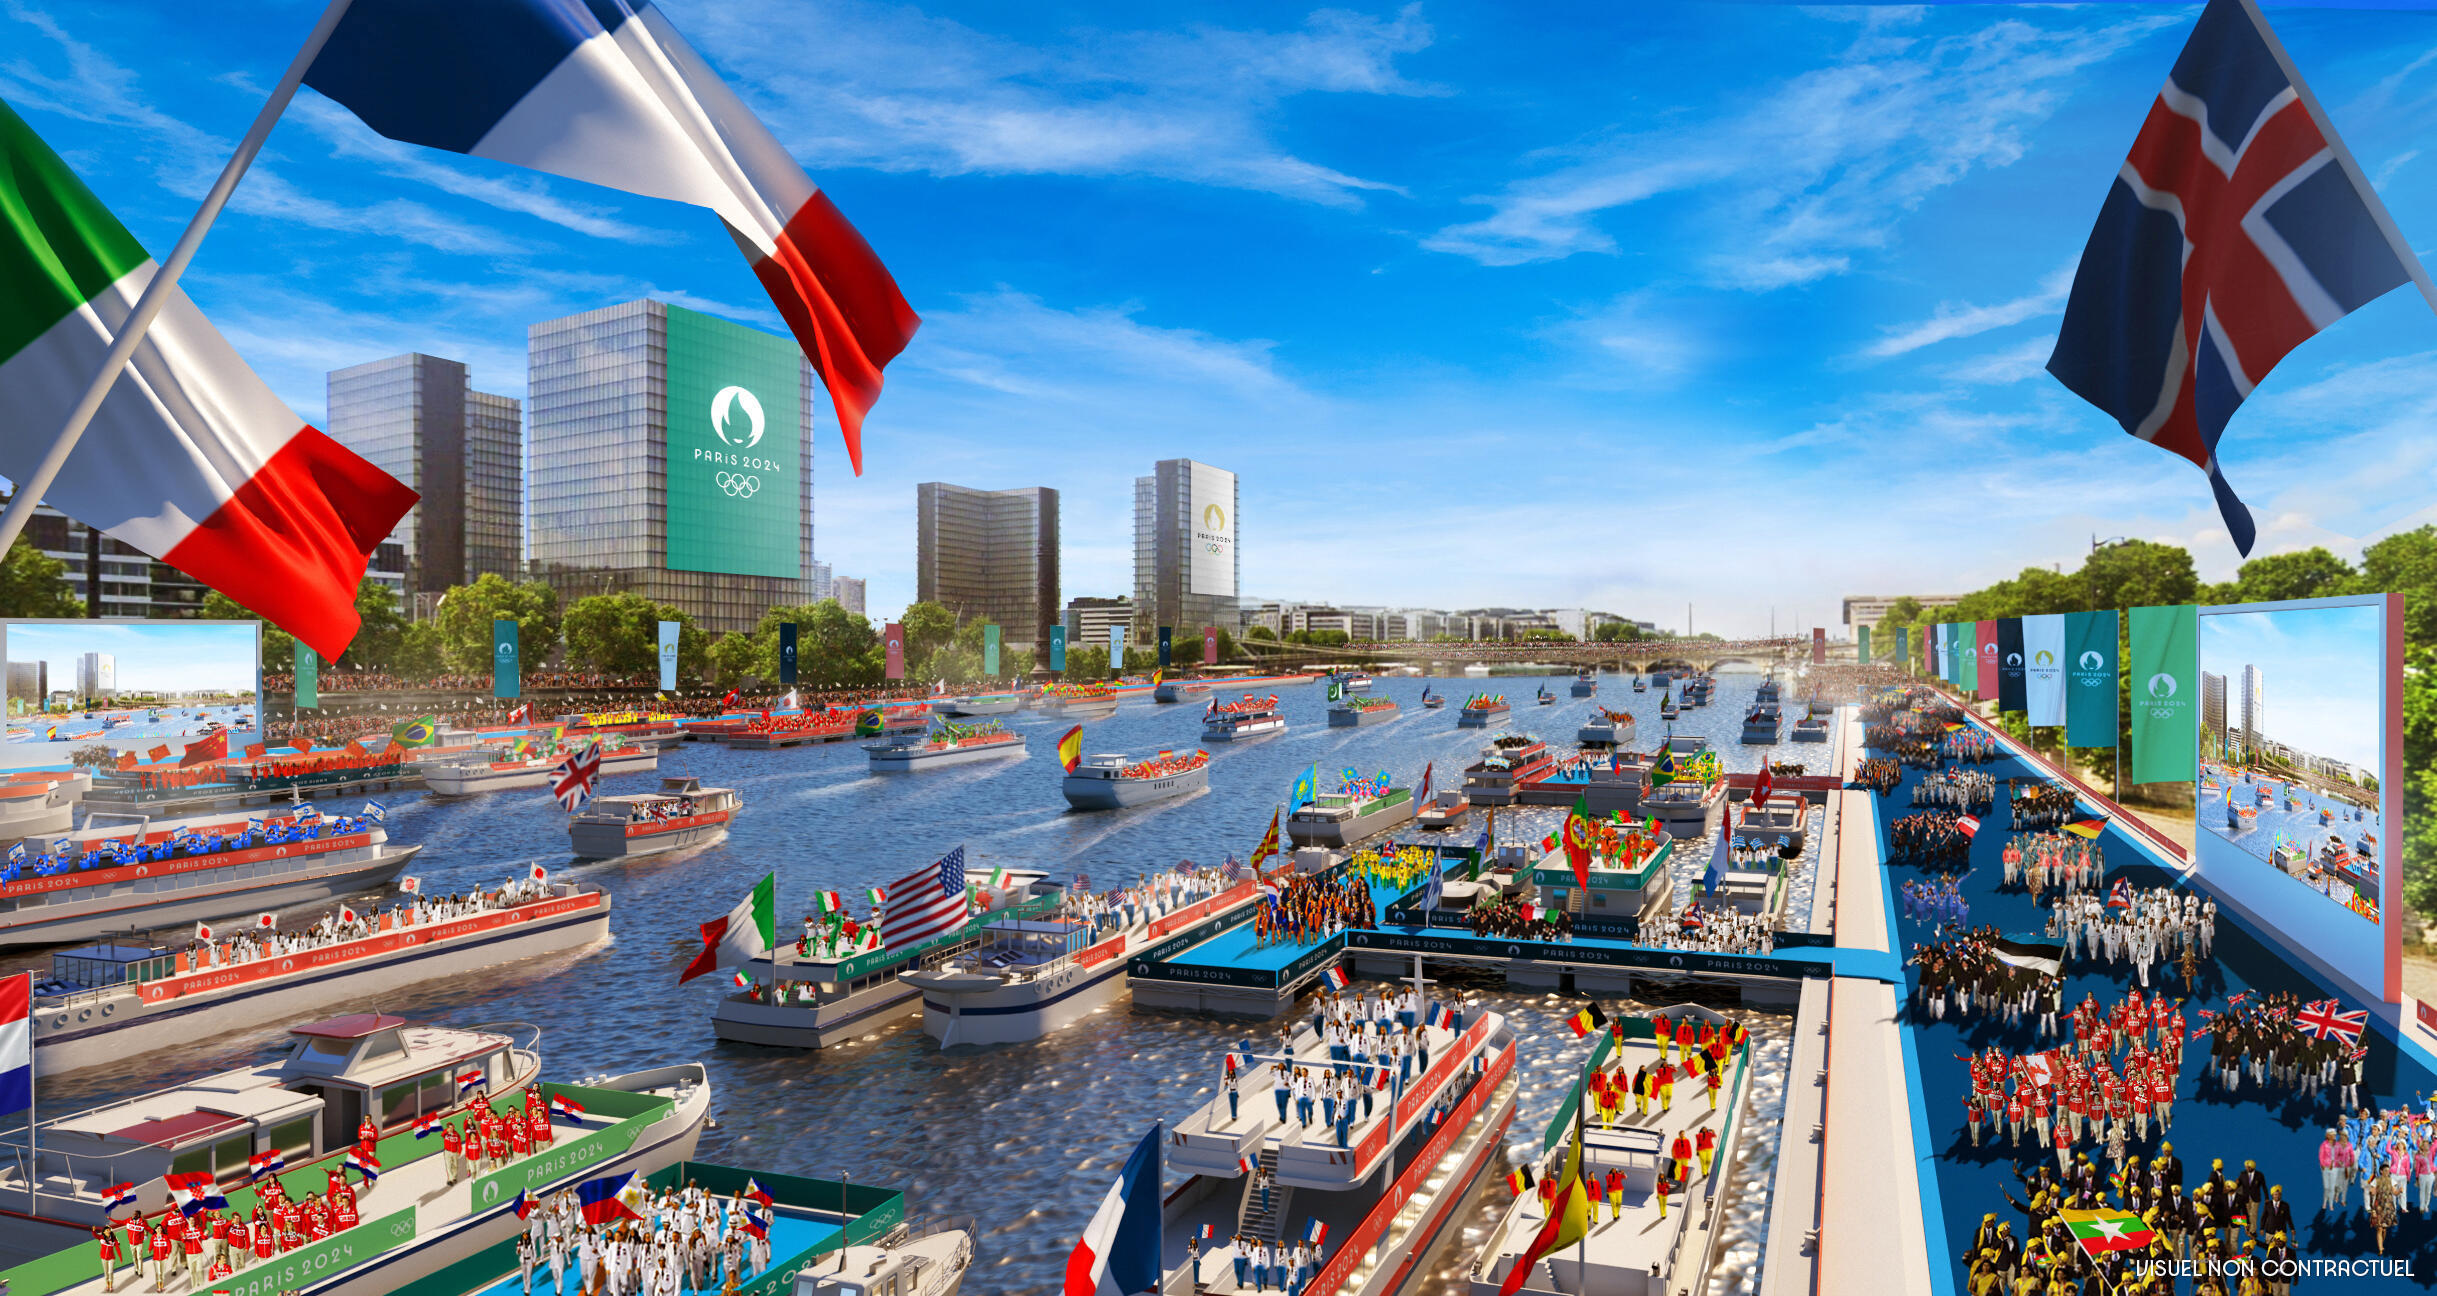 An illustration showing the concept for the Paris Olympics opening ceremony, to be staged on the River Seine.